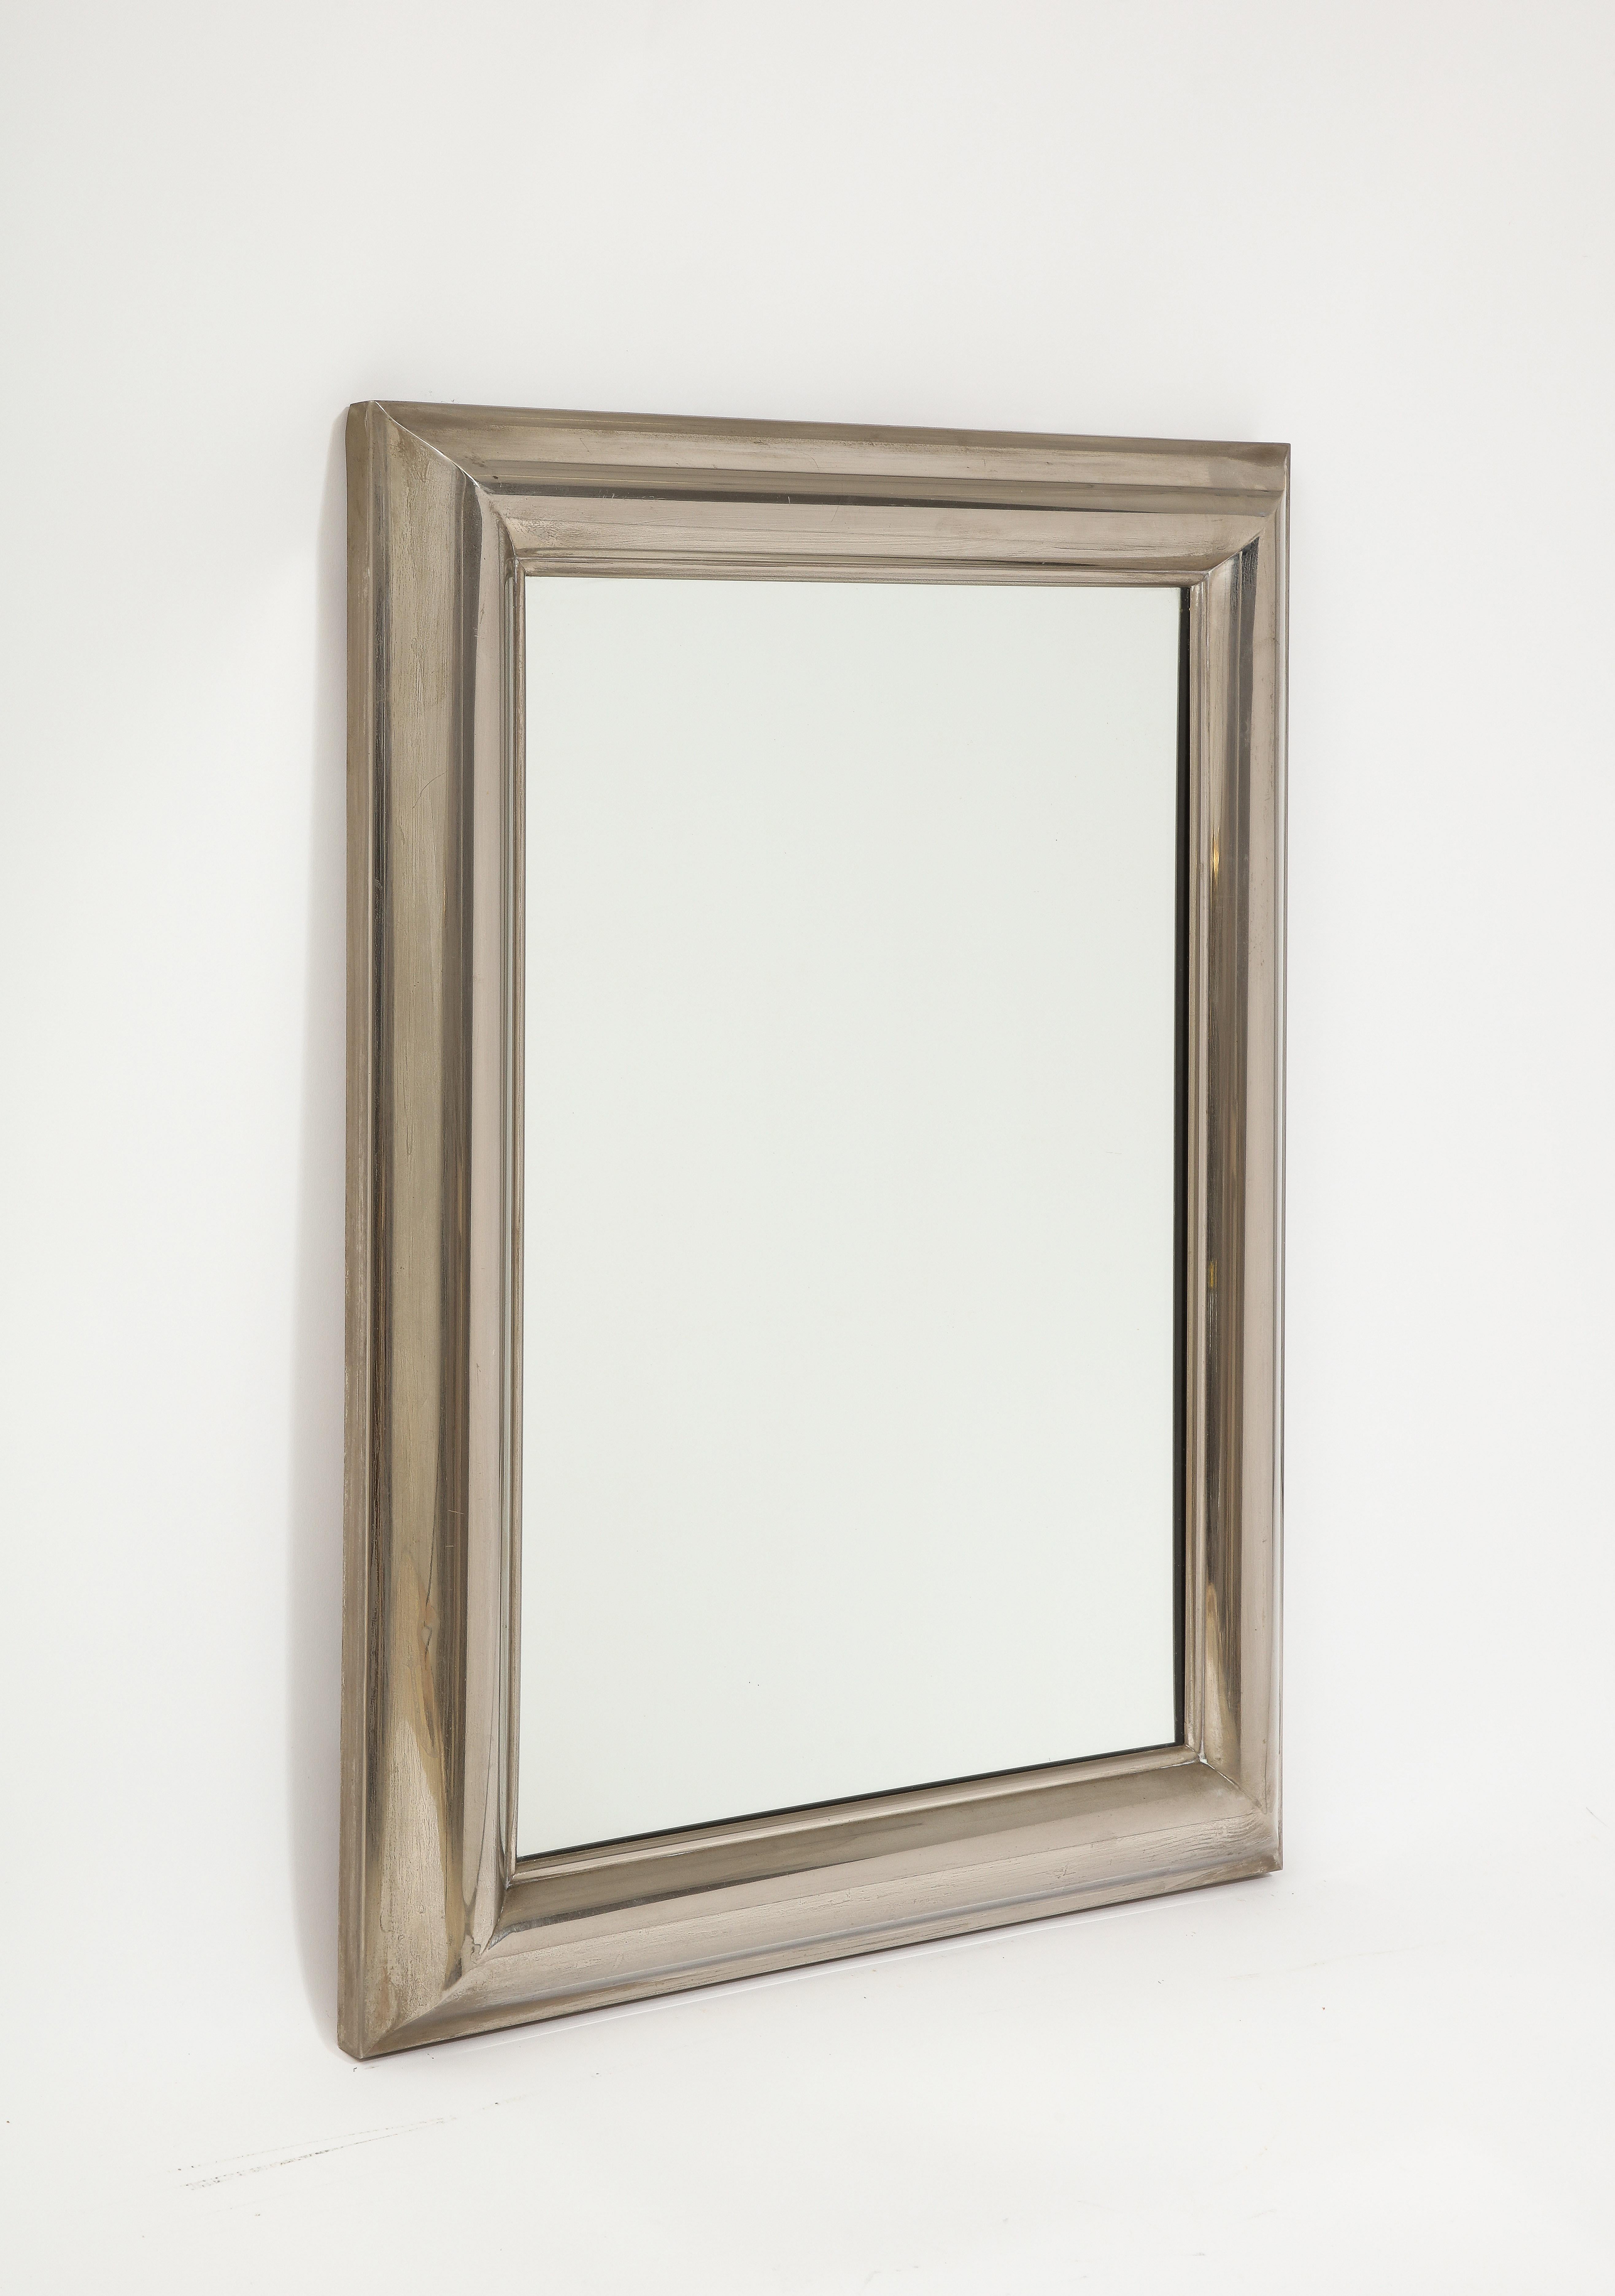 Handsomely proportioned silver plated mirror with great patina and original glass.